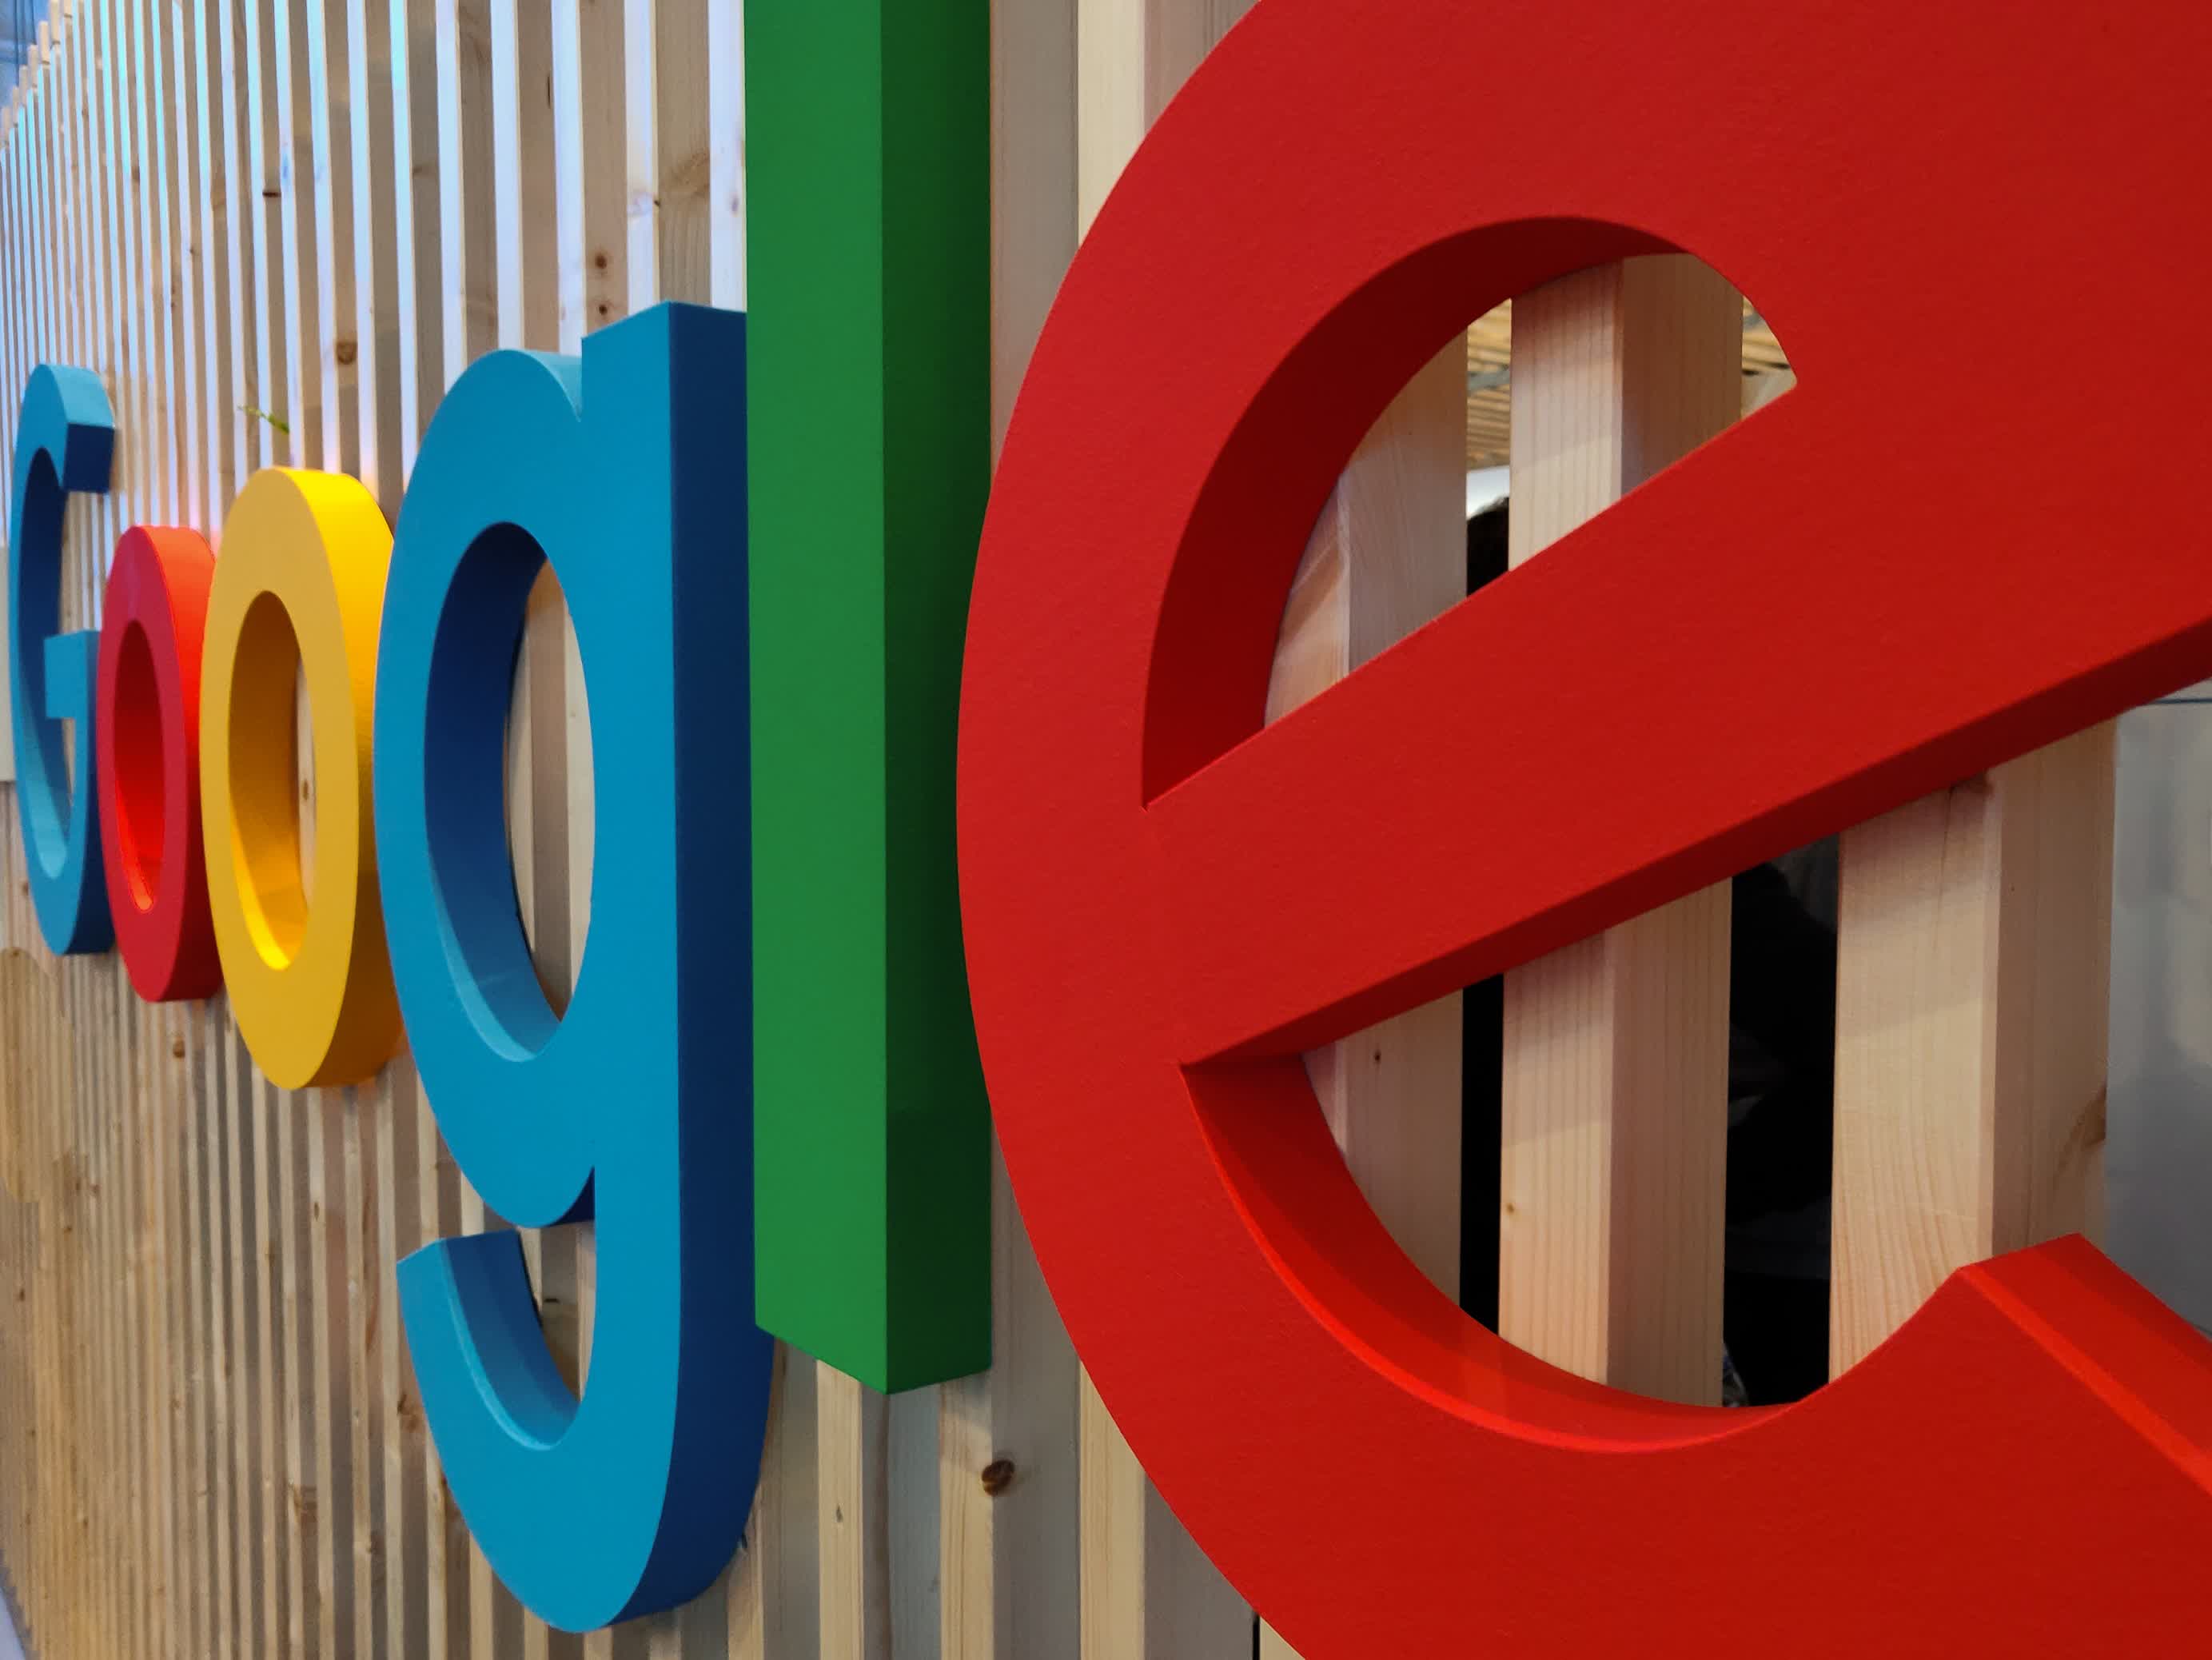 Google accused of illegally spying on employees before firing them